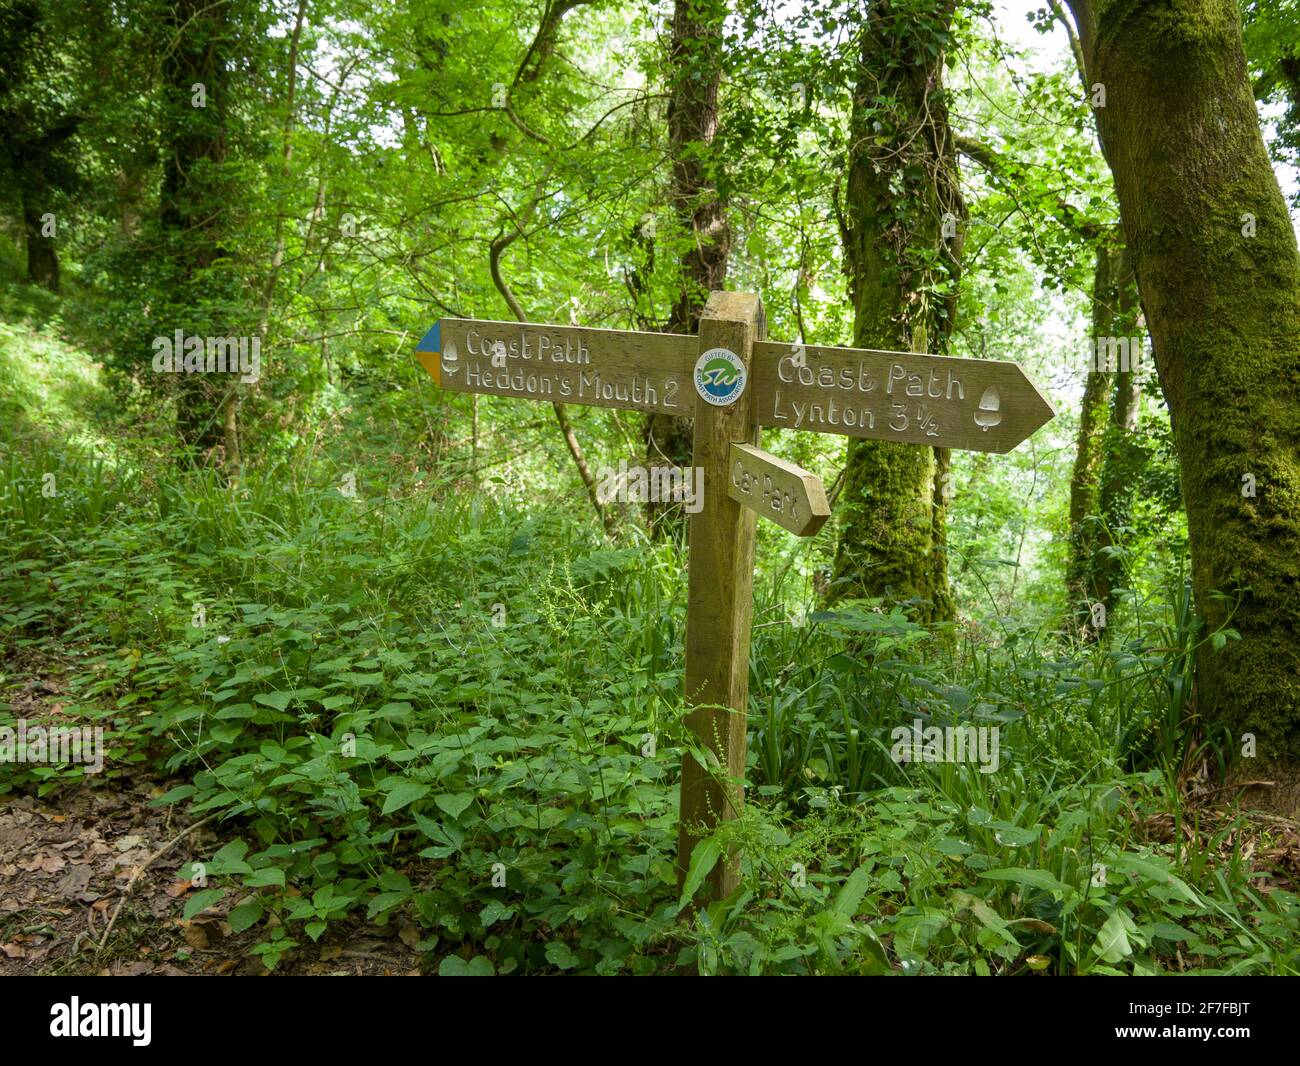 A footpath signpost to Heddon’s Mouth and Lynton on the South West Coast Path at Woody Bay in Exmoor National Park, North Devon, England. Stock Photo